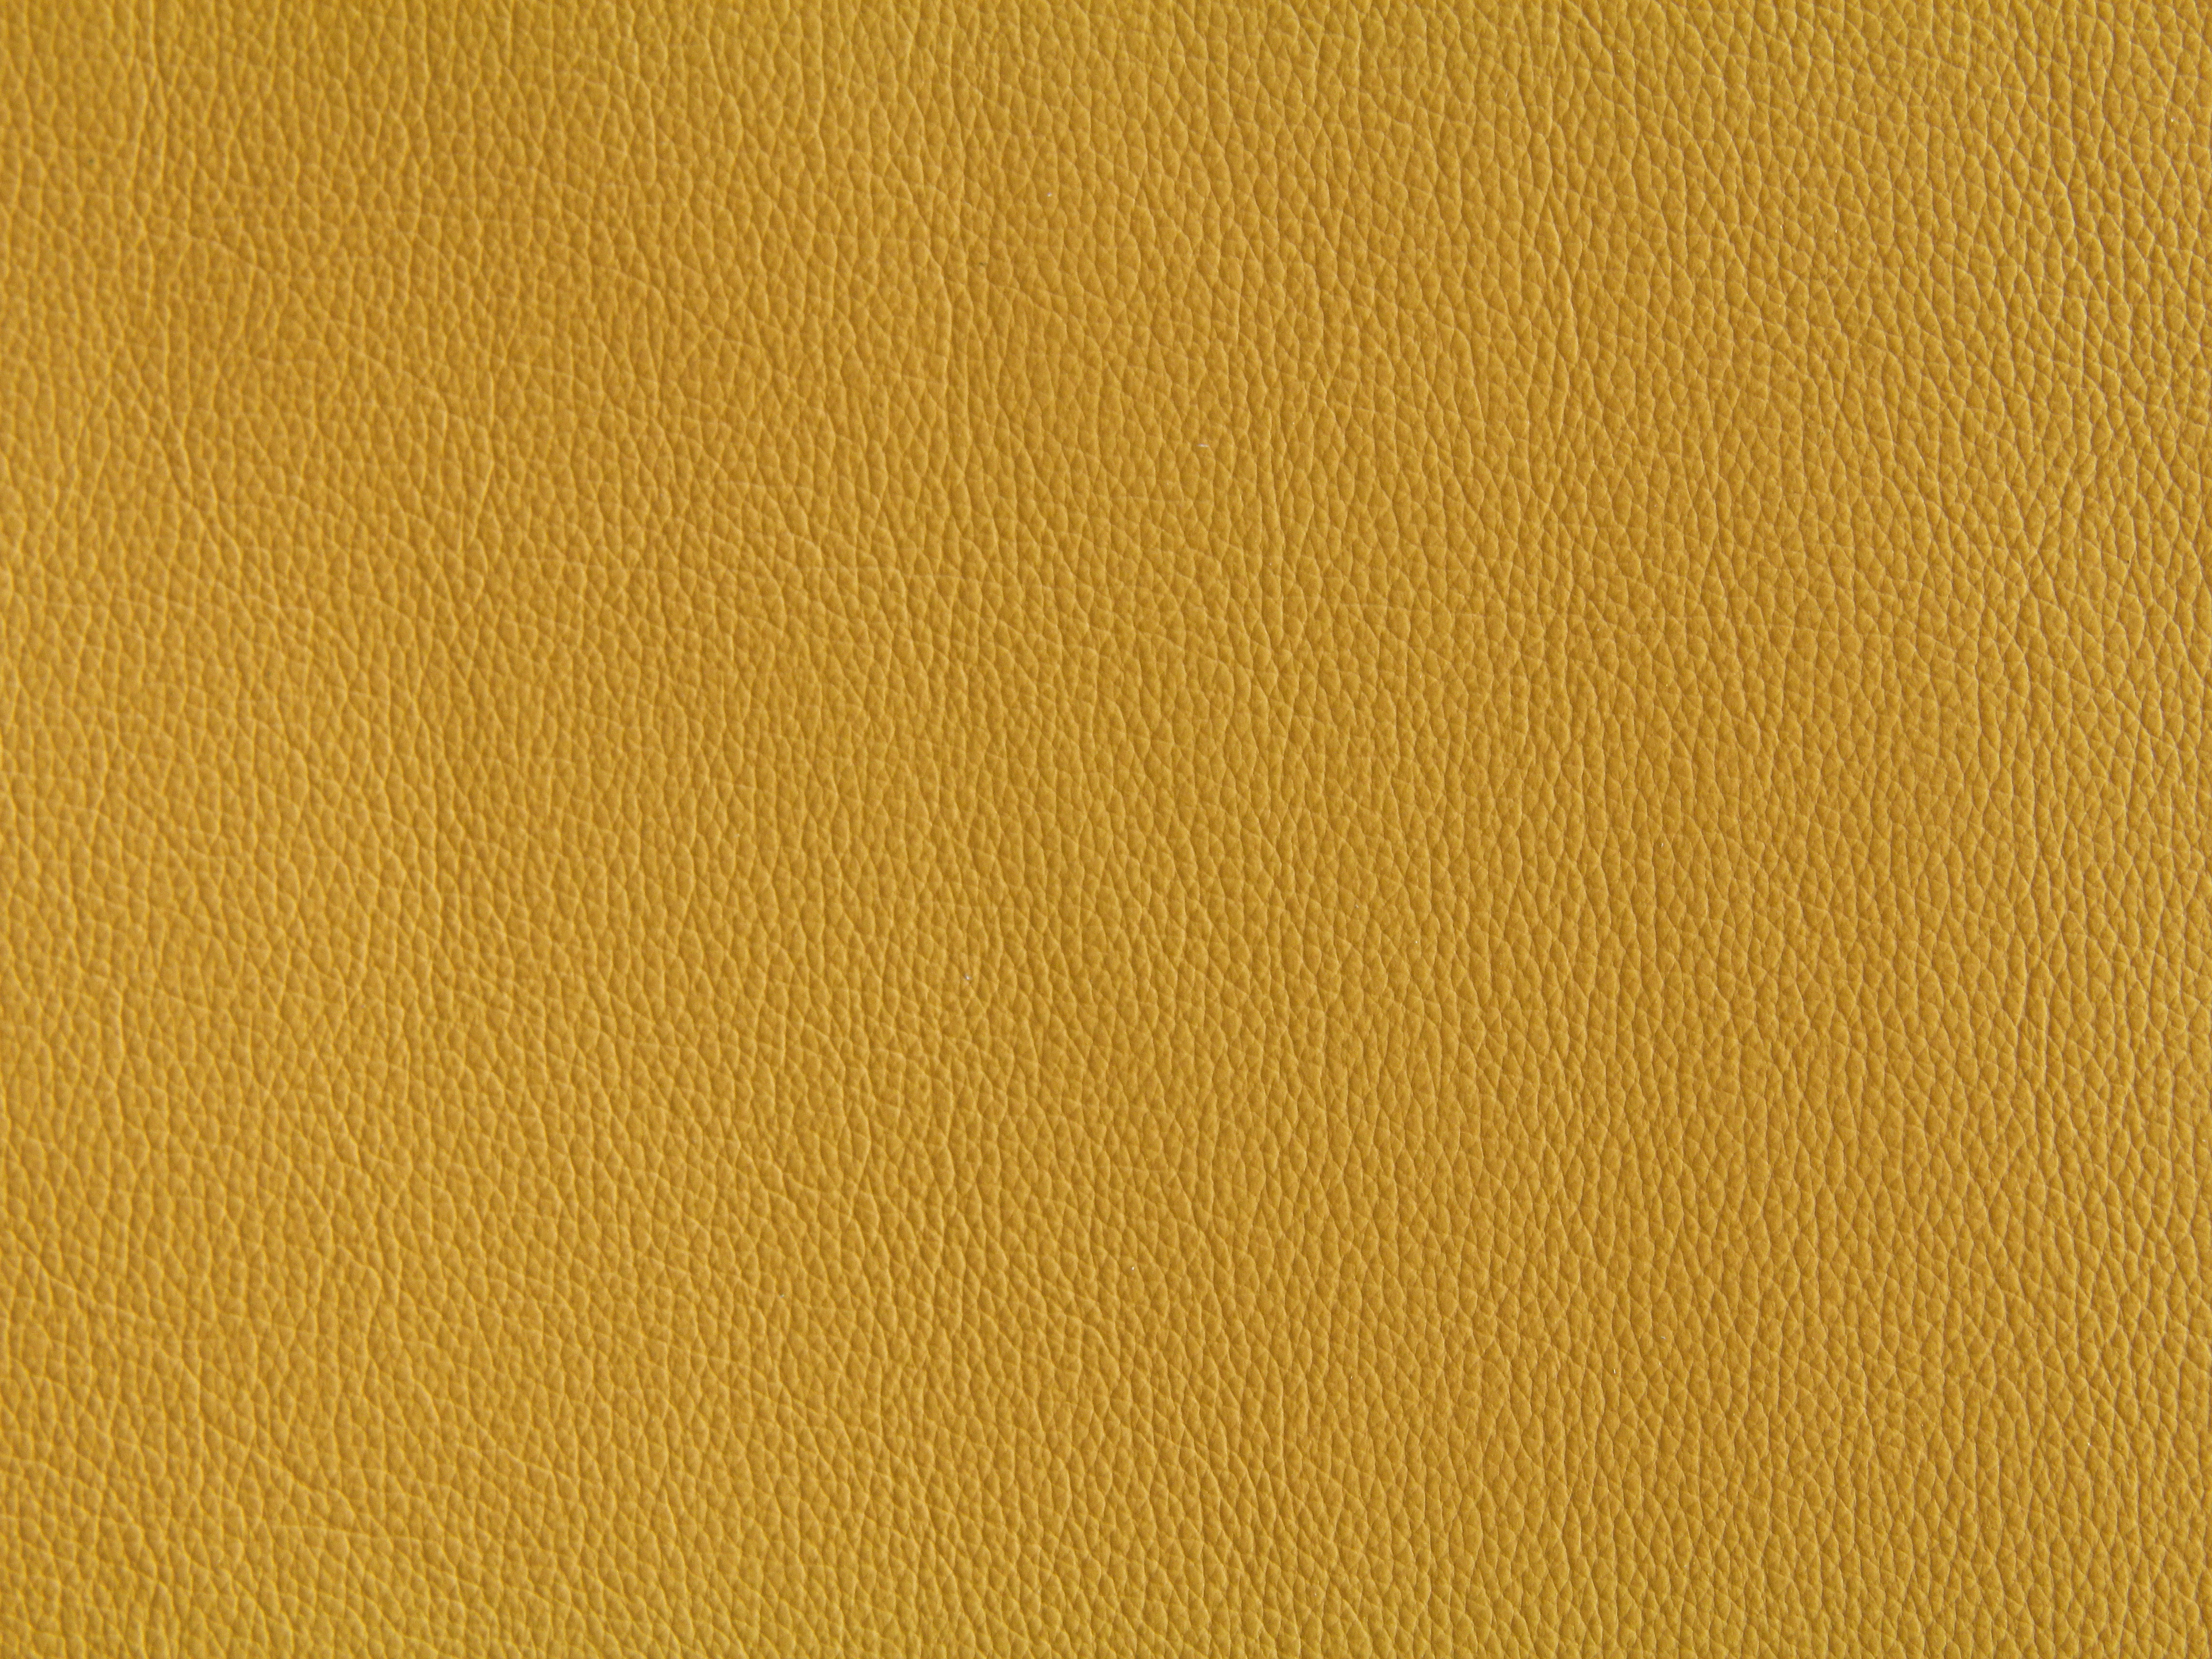 yellow-leather-texture-wallpaper-fabric-material-design-bright-stock ...